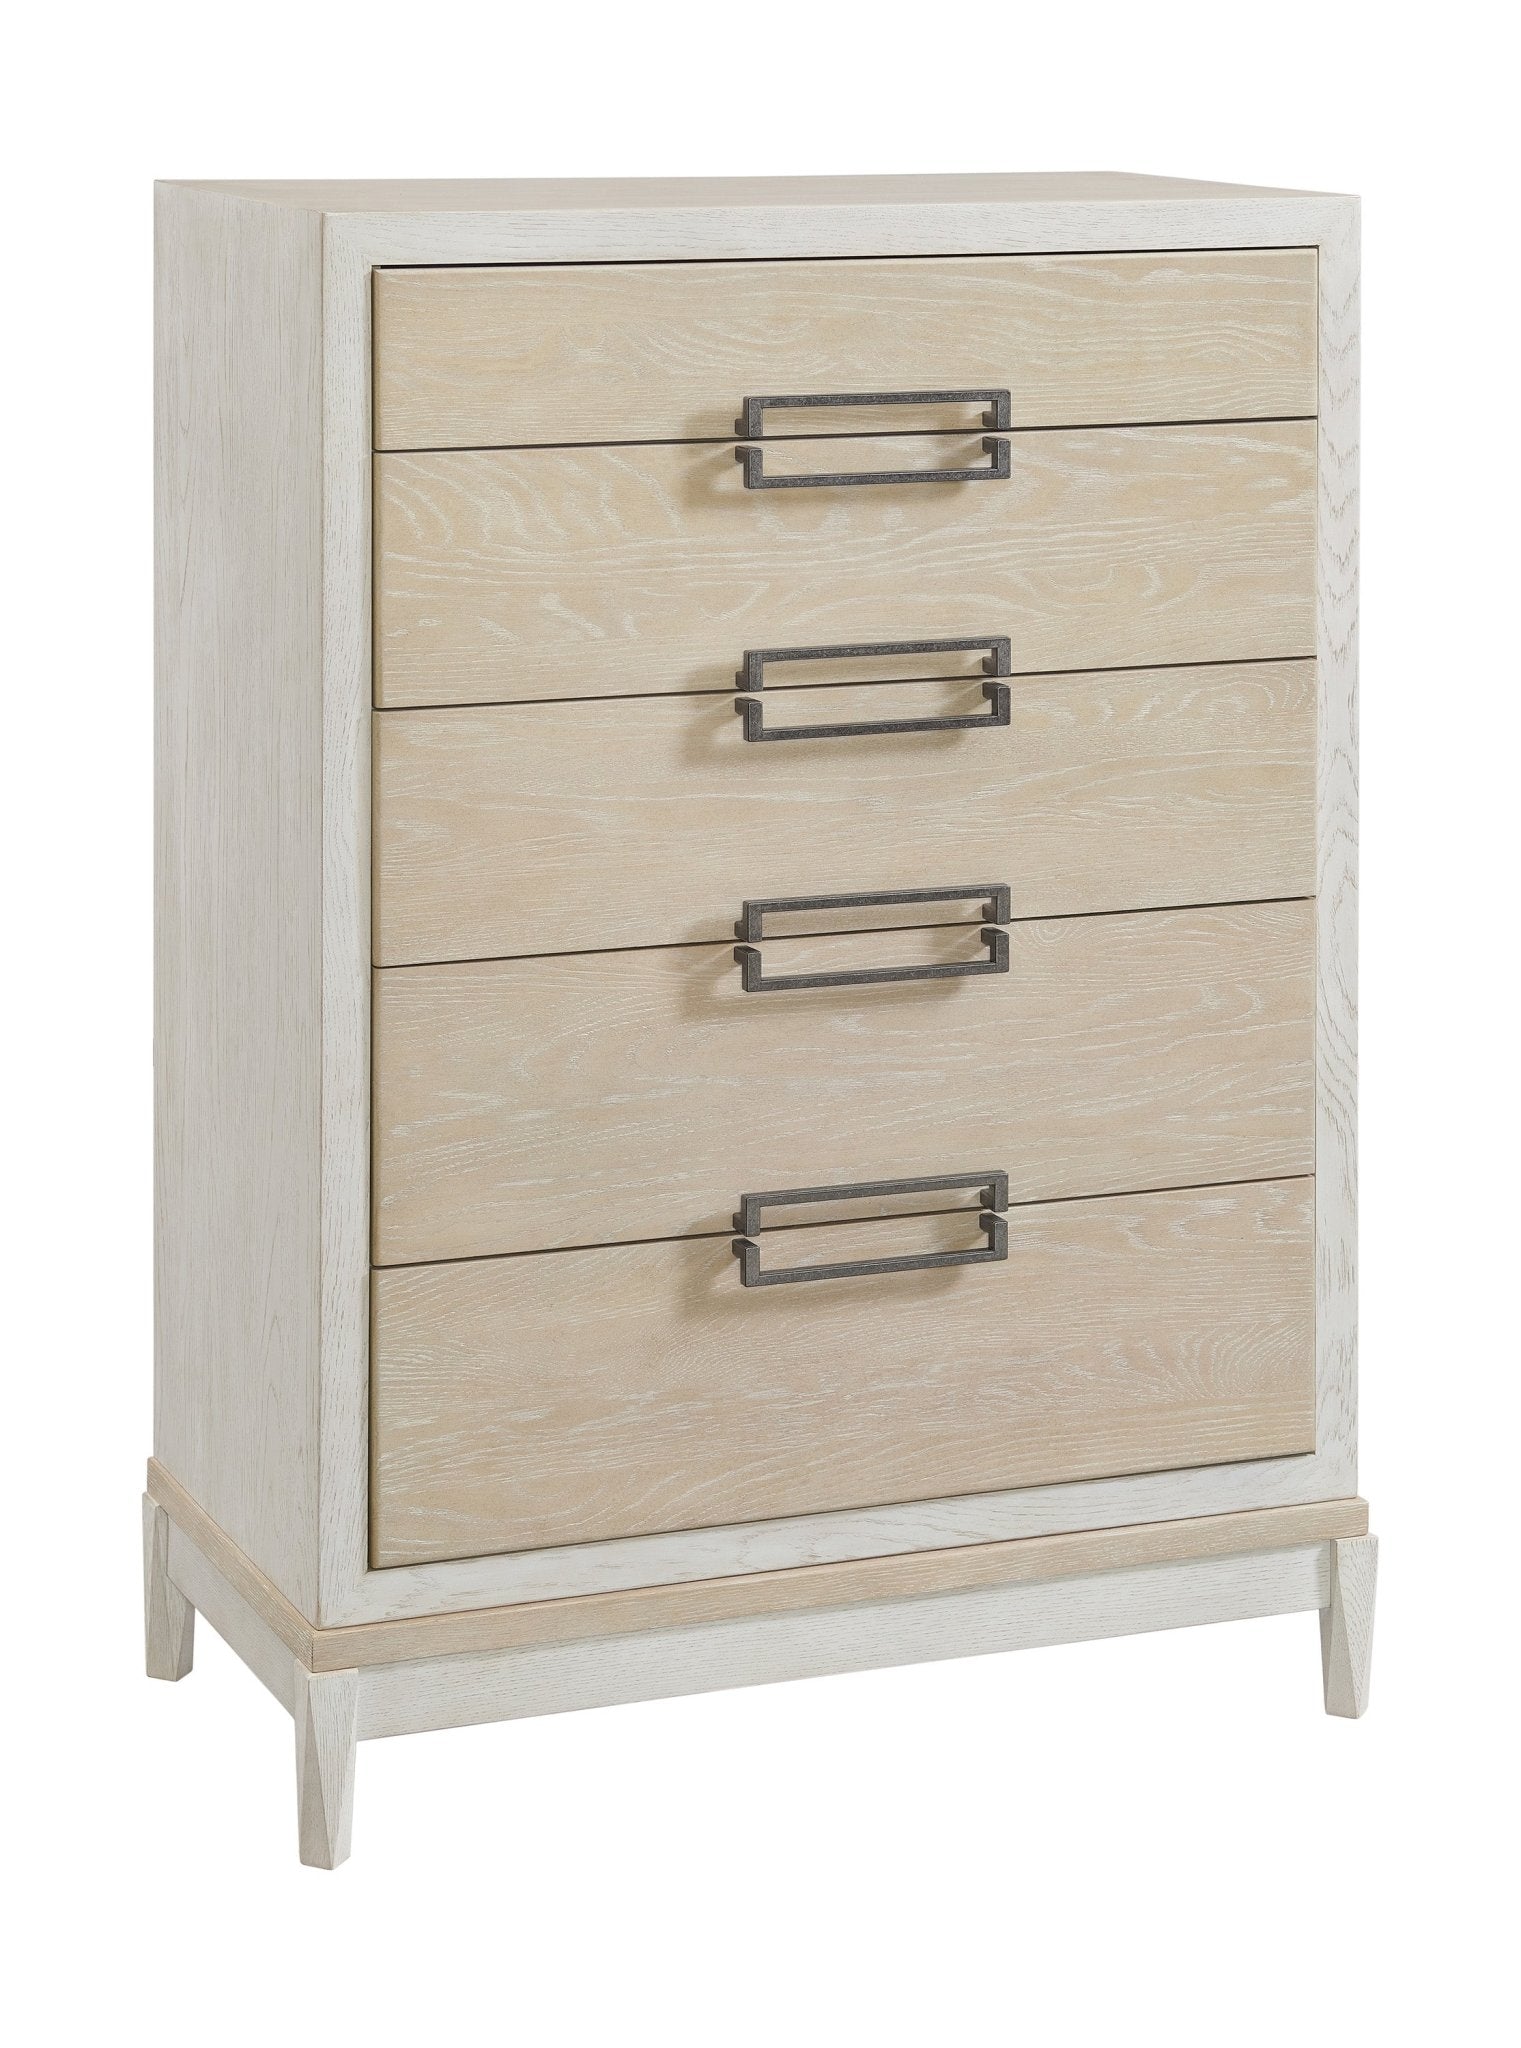 Catalina 5-Drawer Chest - Baconco